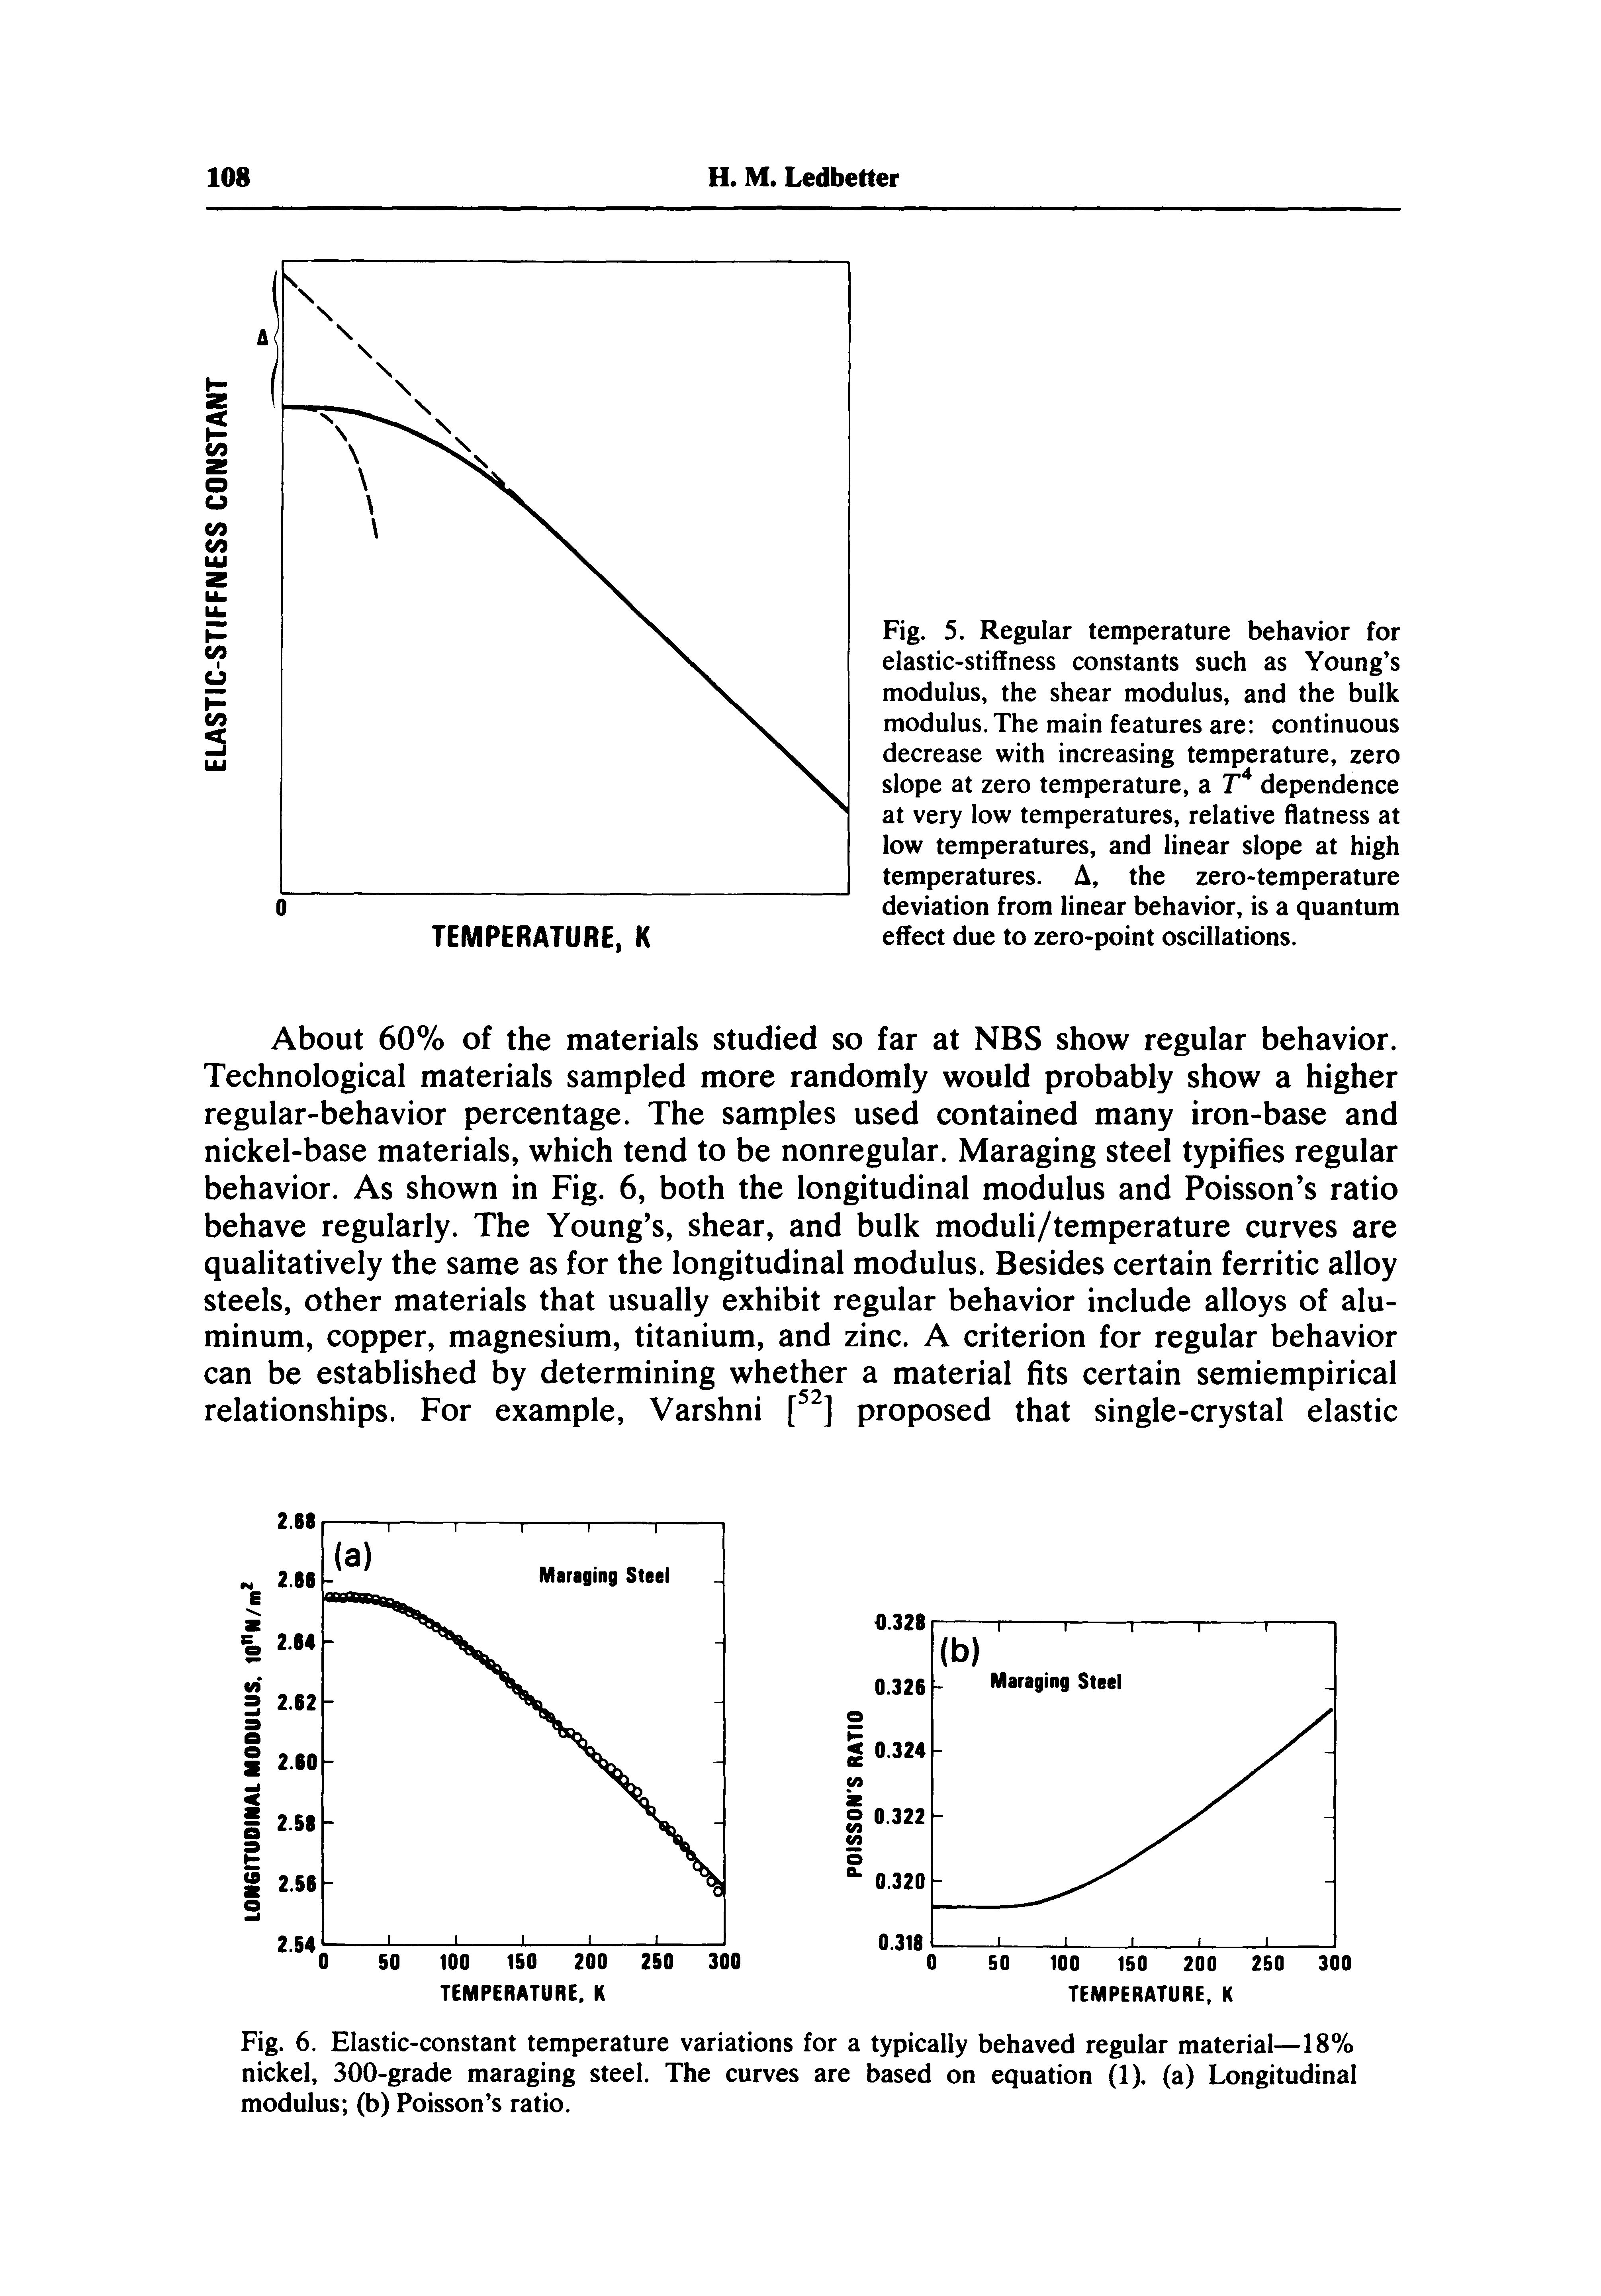 Fig. 5. Regular temperature behavior for elastic-stiffness constants such as Young s modulus, the shear modulus, and the bulk modulus. The main features are continuous decrease with increasing temperature, zero slope at zero temperature, a i dependence at very low temperatures, relative flatness at low temperatures, and linear slope at high temperatures. A, the zero-temperature deviation from linear behavior, is a quantum effect due to zero-point oscillations.